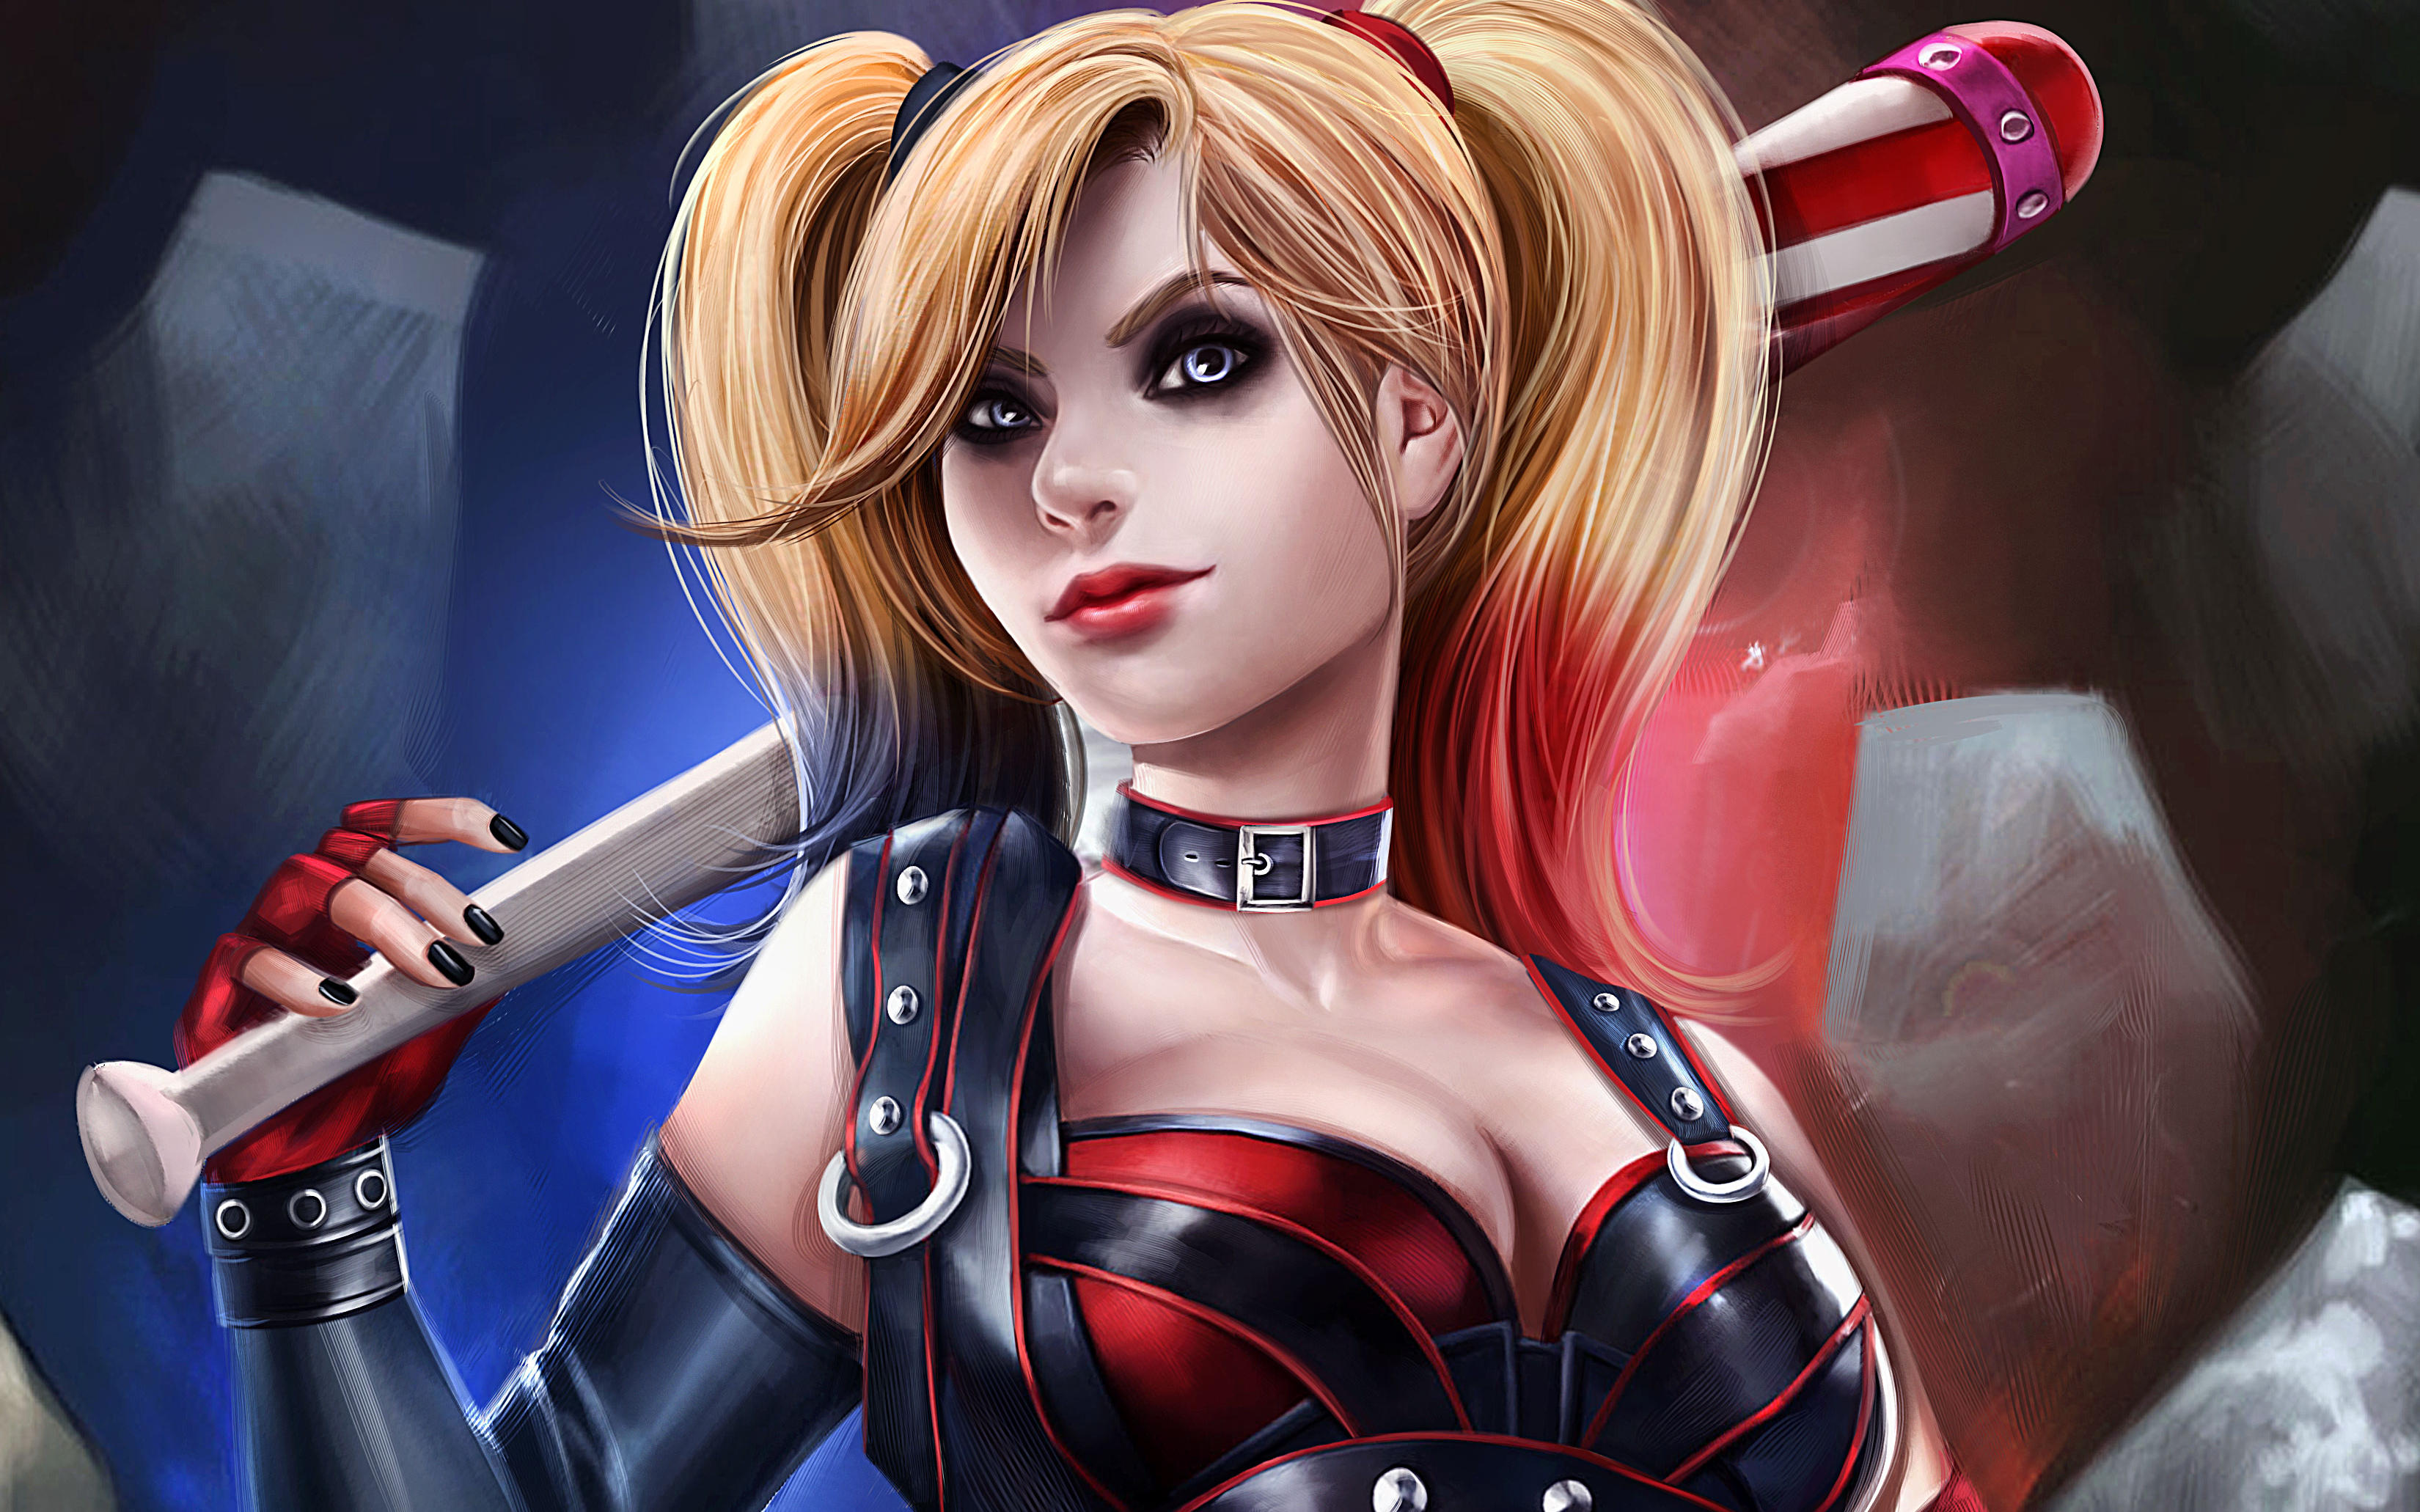 420+ Harley Quinn HD Wallpapers and Backgrounds